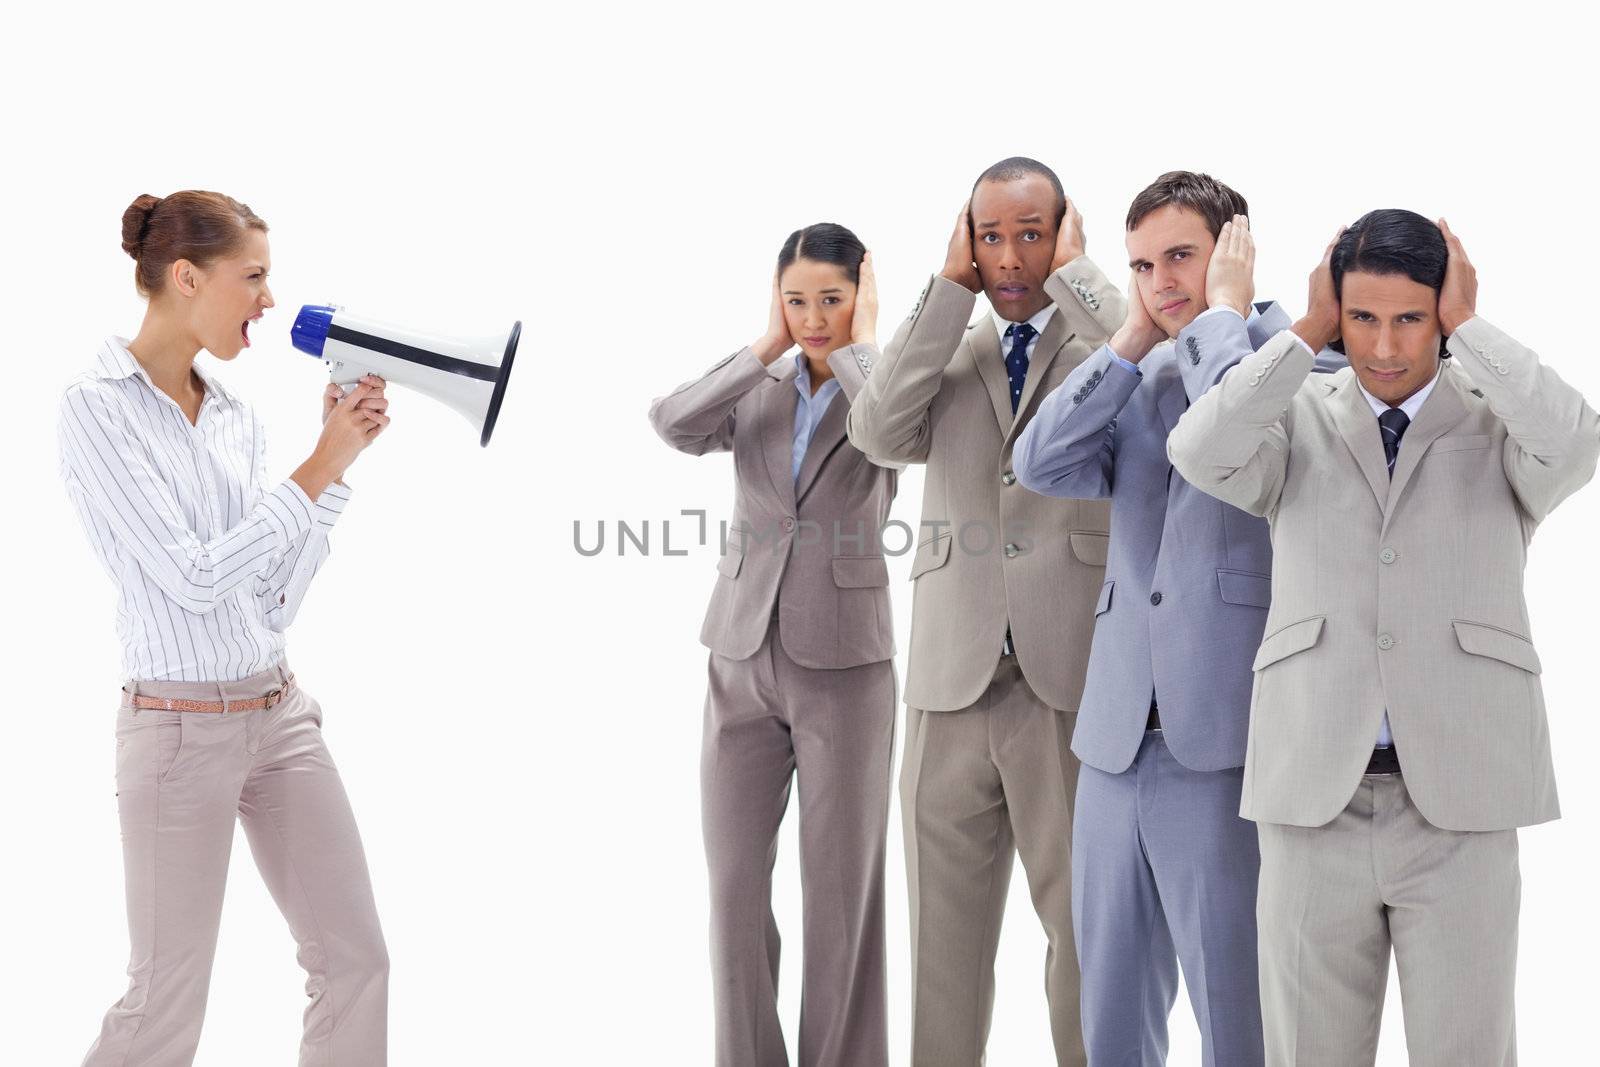 Woman yelling through a megaphone at business people with their hands on their ears against white background